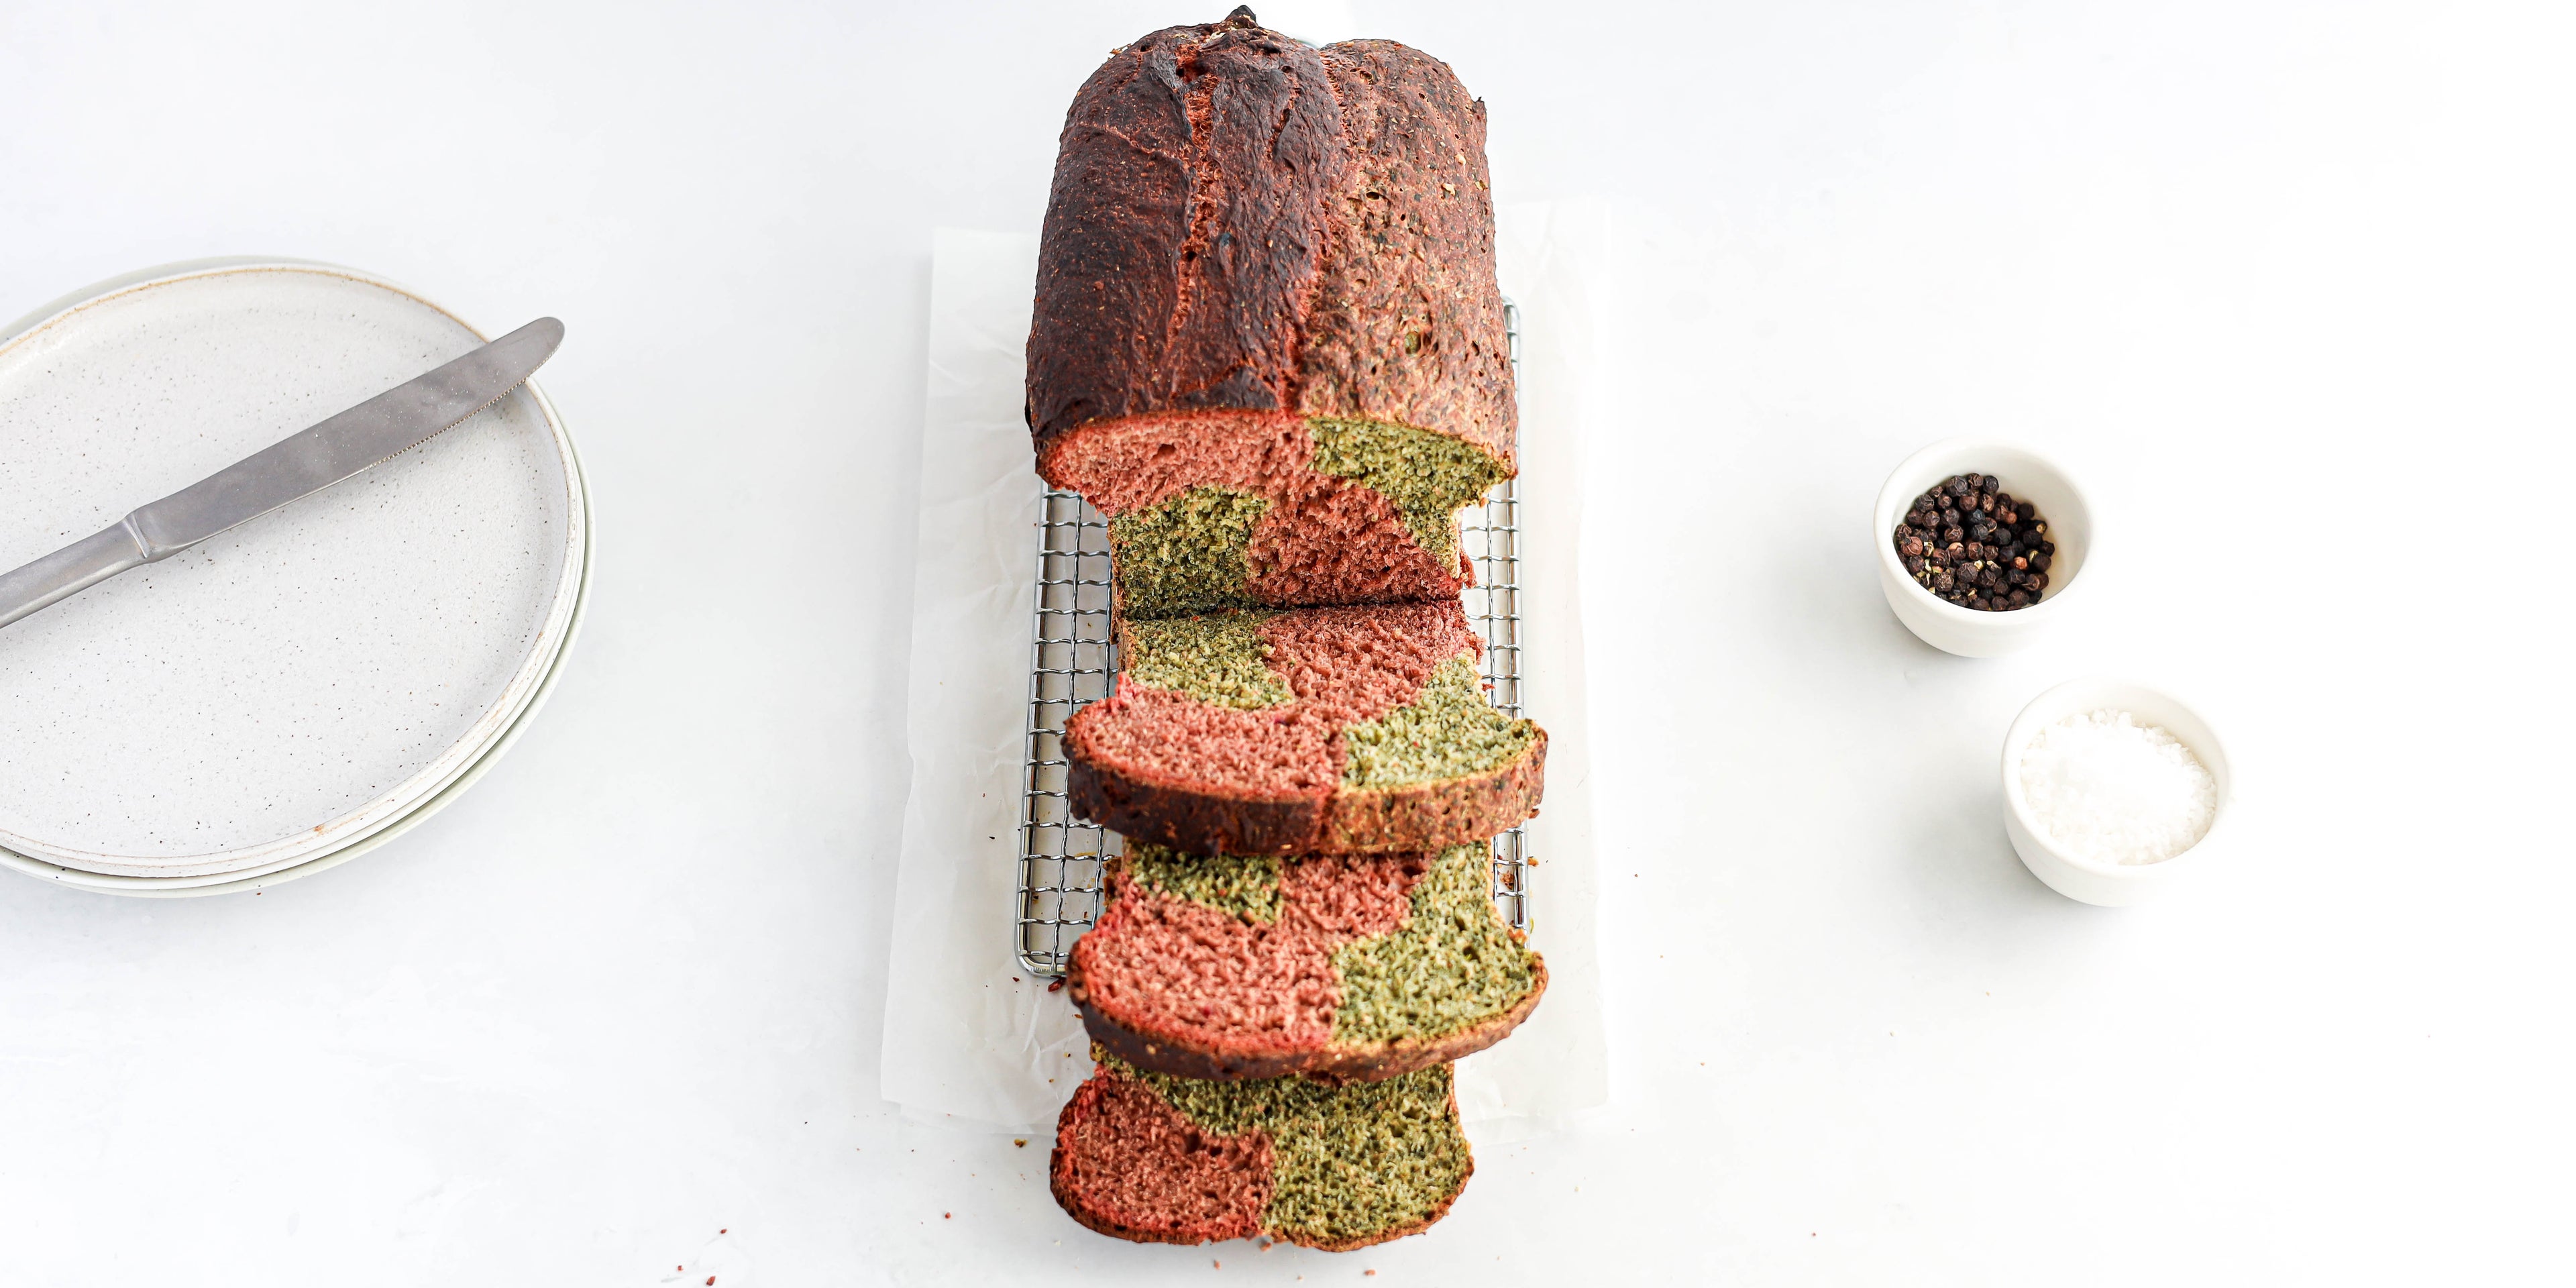 Top view of Marble Vegetable Bread being sliced on a wire rack, showing the pink and green insides